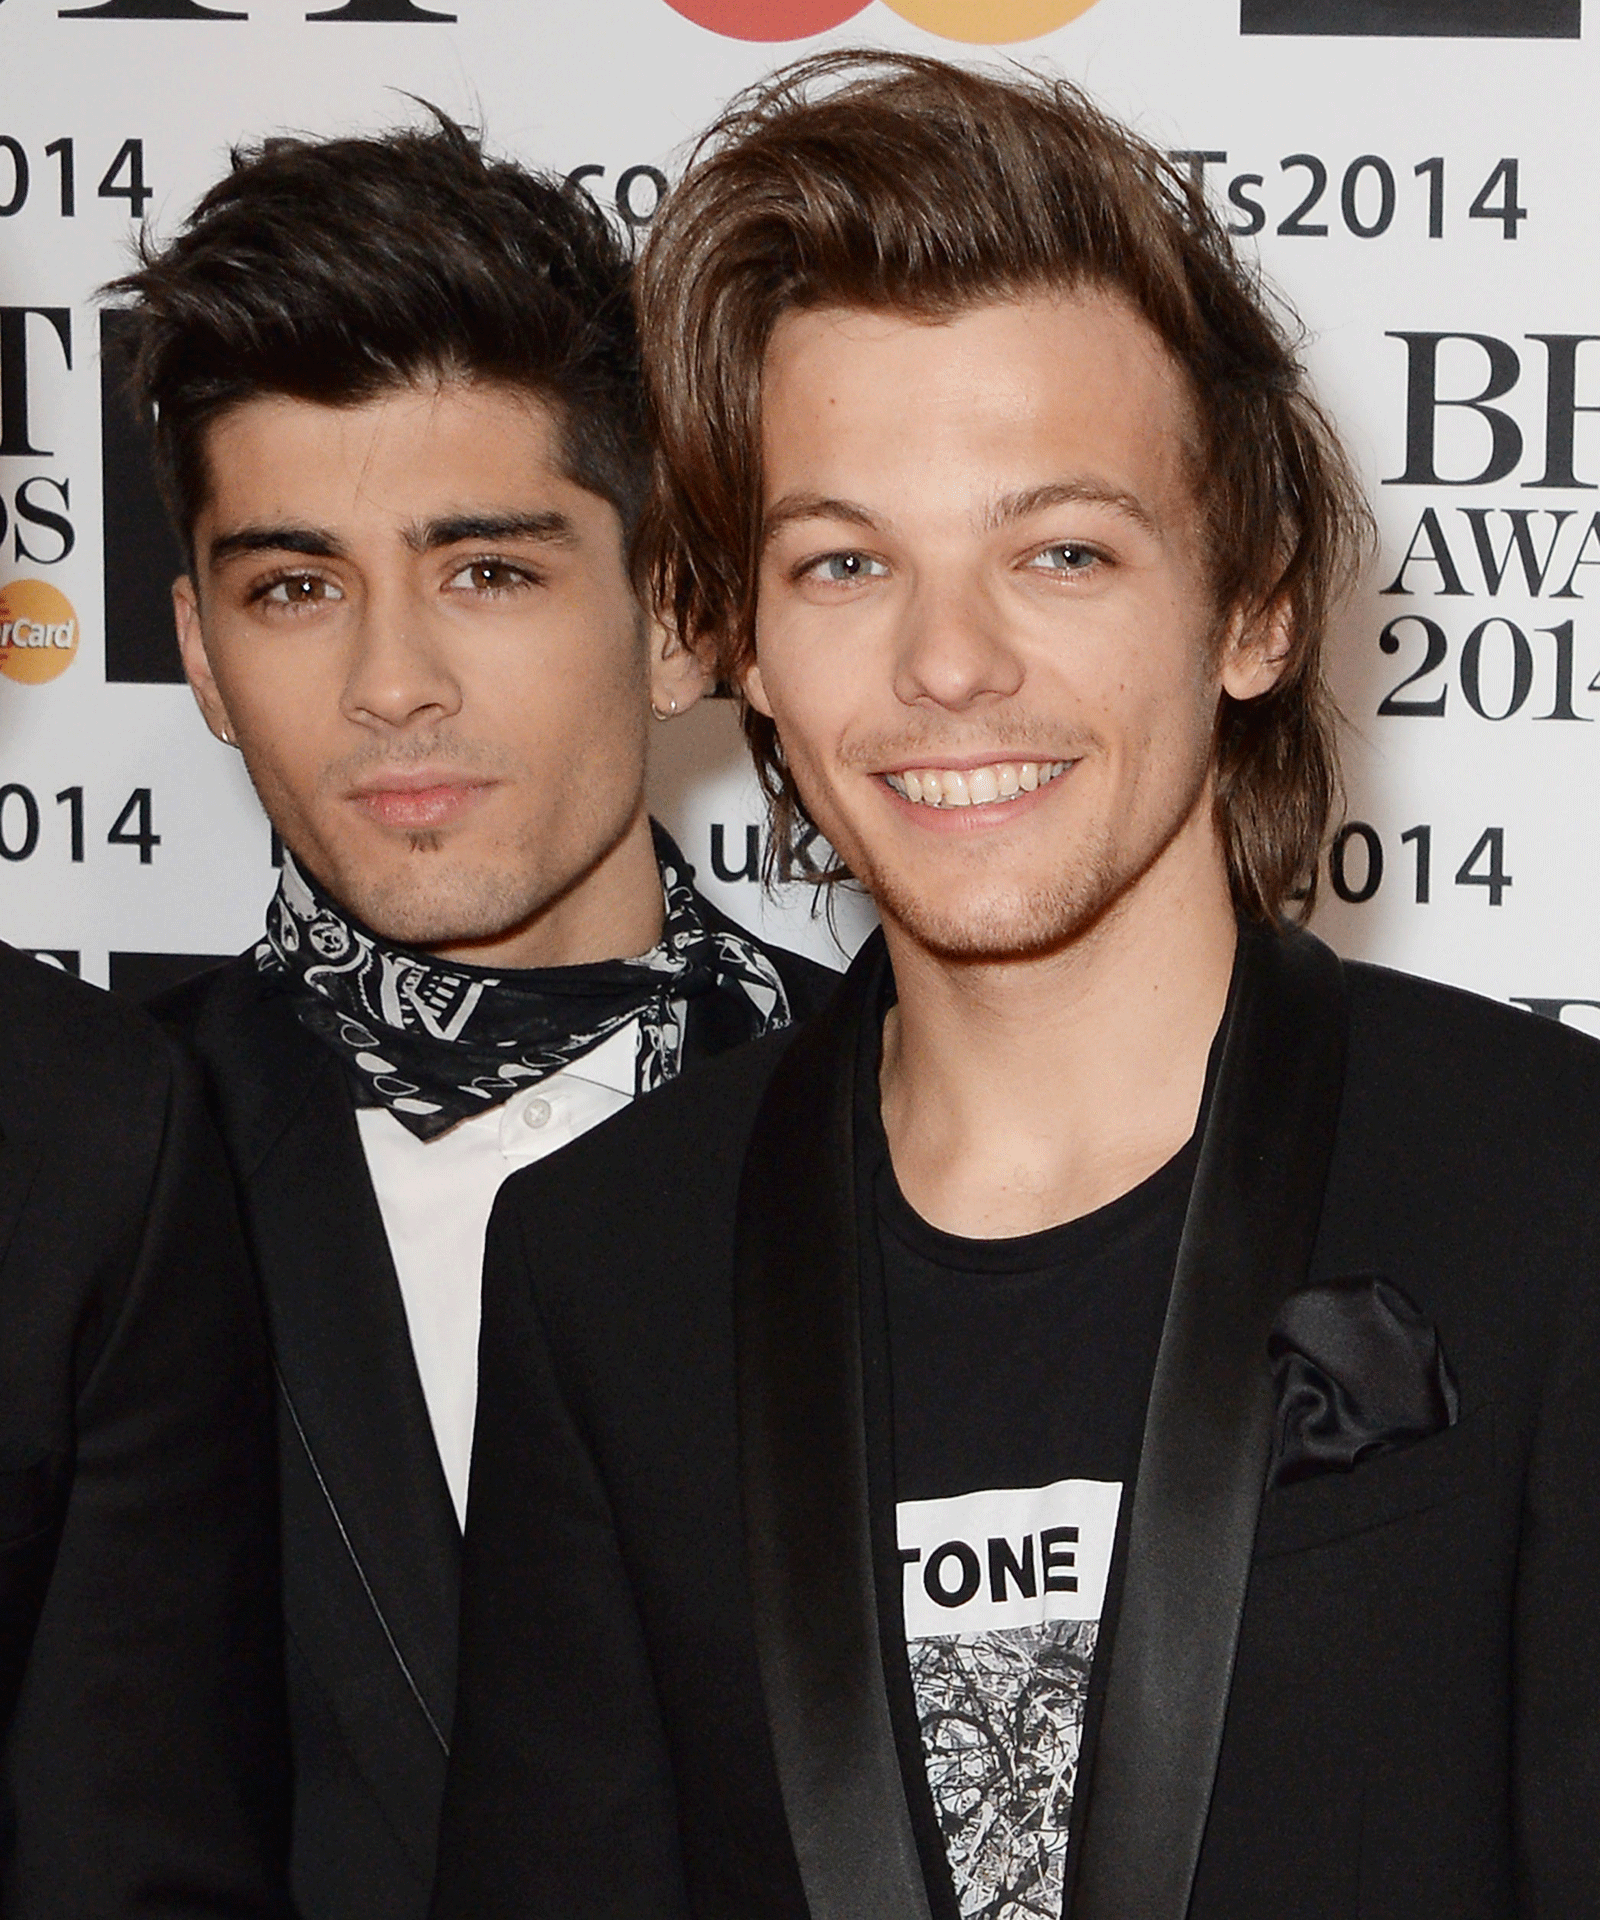 “Remember when you used to have a life?” Zayn Malik hits back at former band-mate Louis Tomlinson in nasty Twitter spat